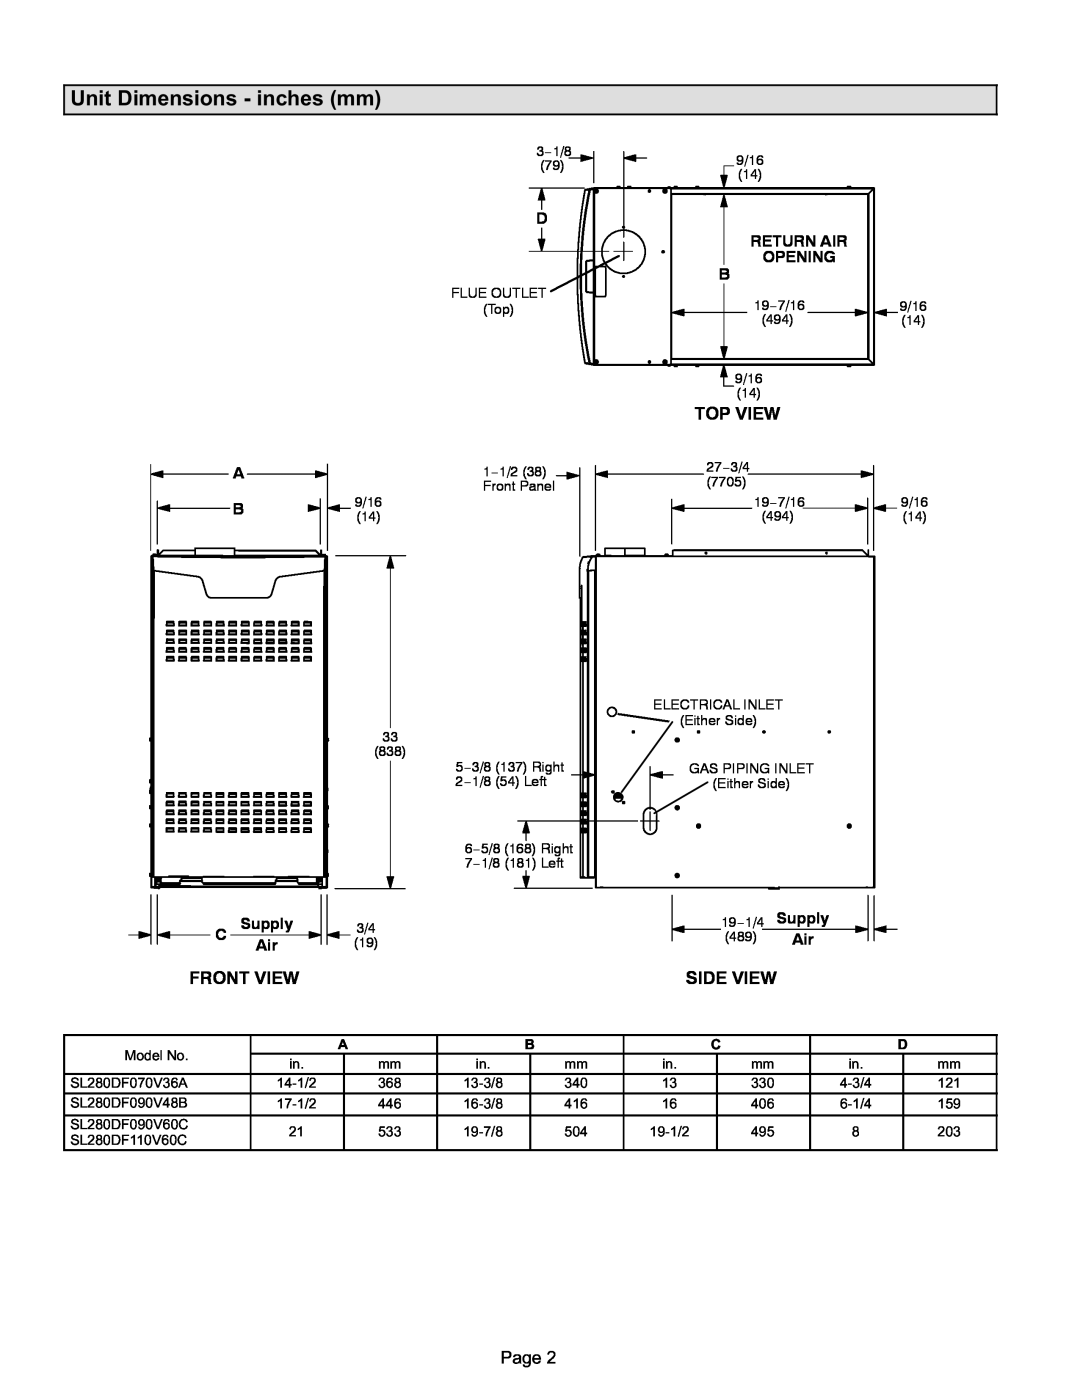 Lennox International Inc SL280DFV Unit Dimensions − inches mm, Front View, Top View, Side View, A B CSupply Air, Opening 